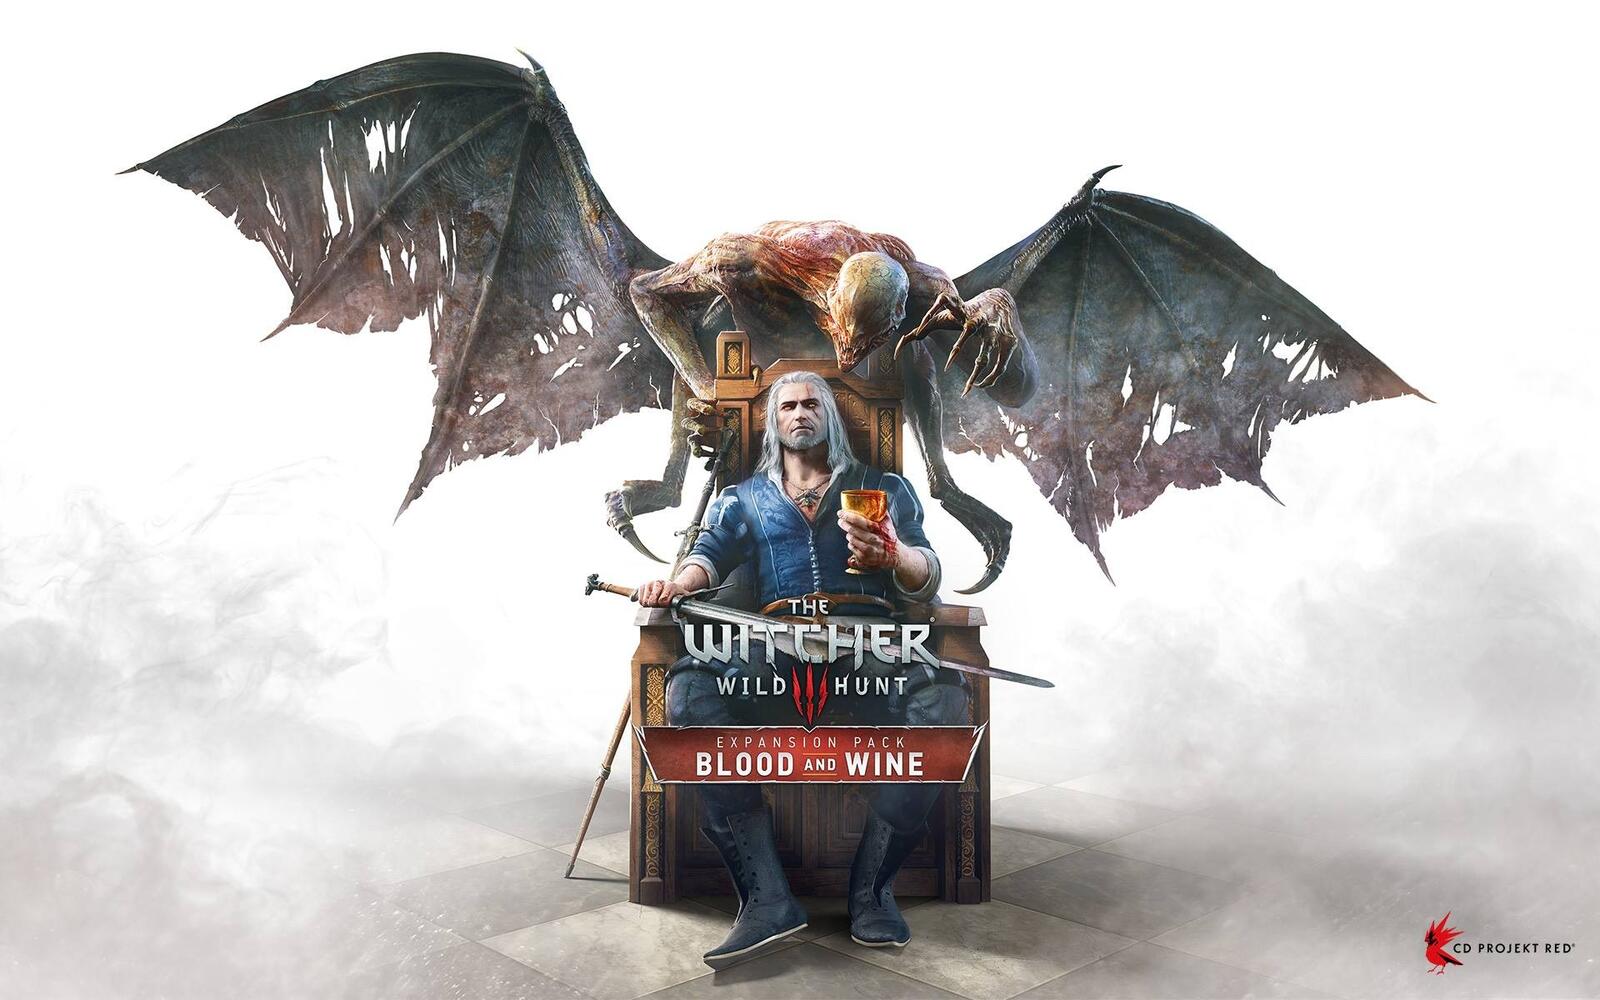 Free photo Screensaver from The Witcher 3